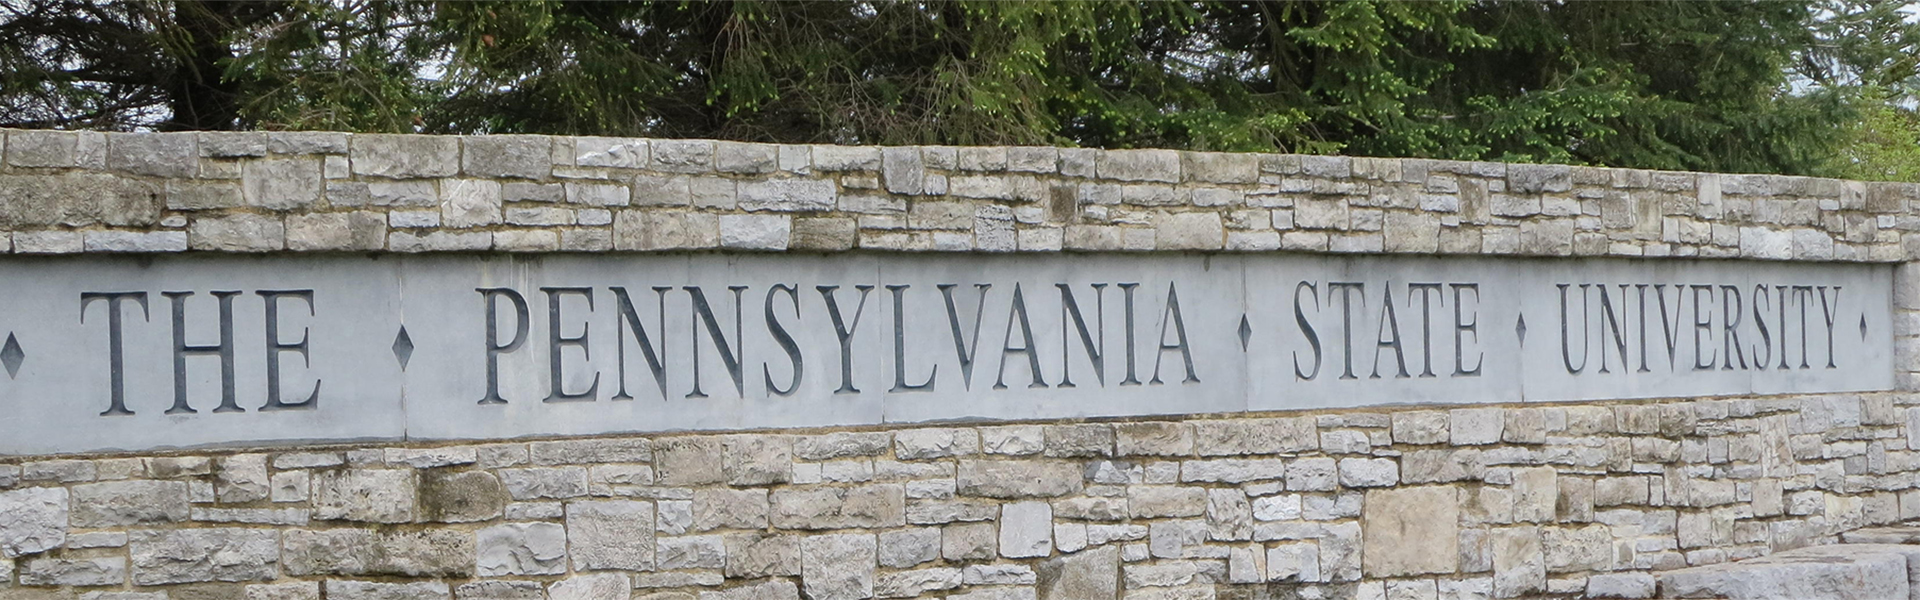 Penn State sign